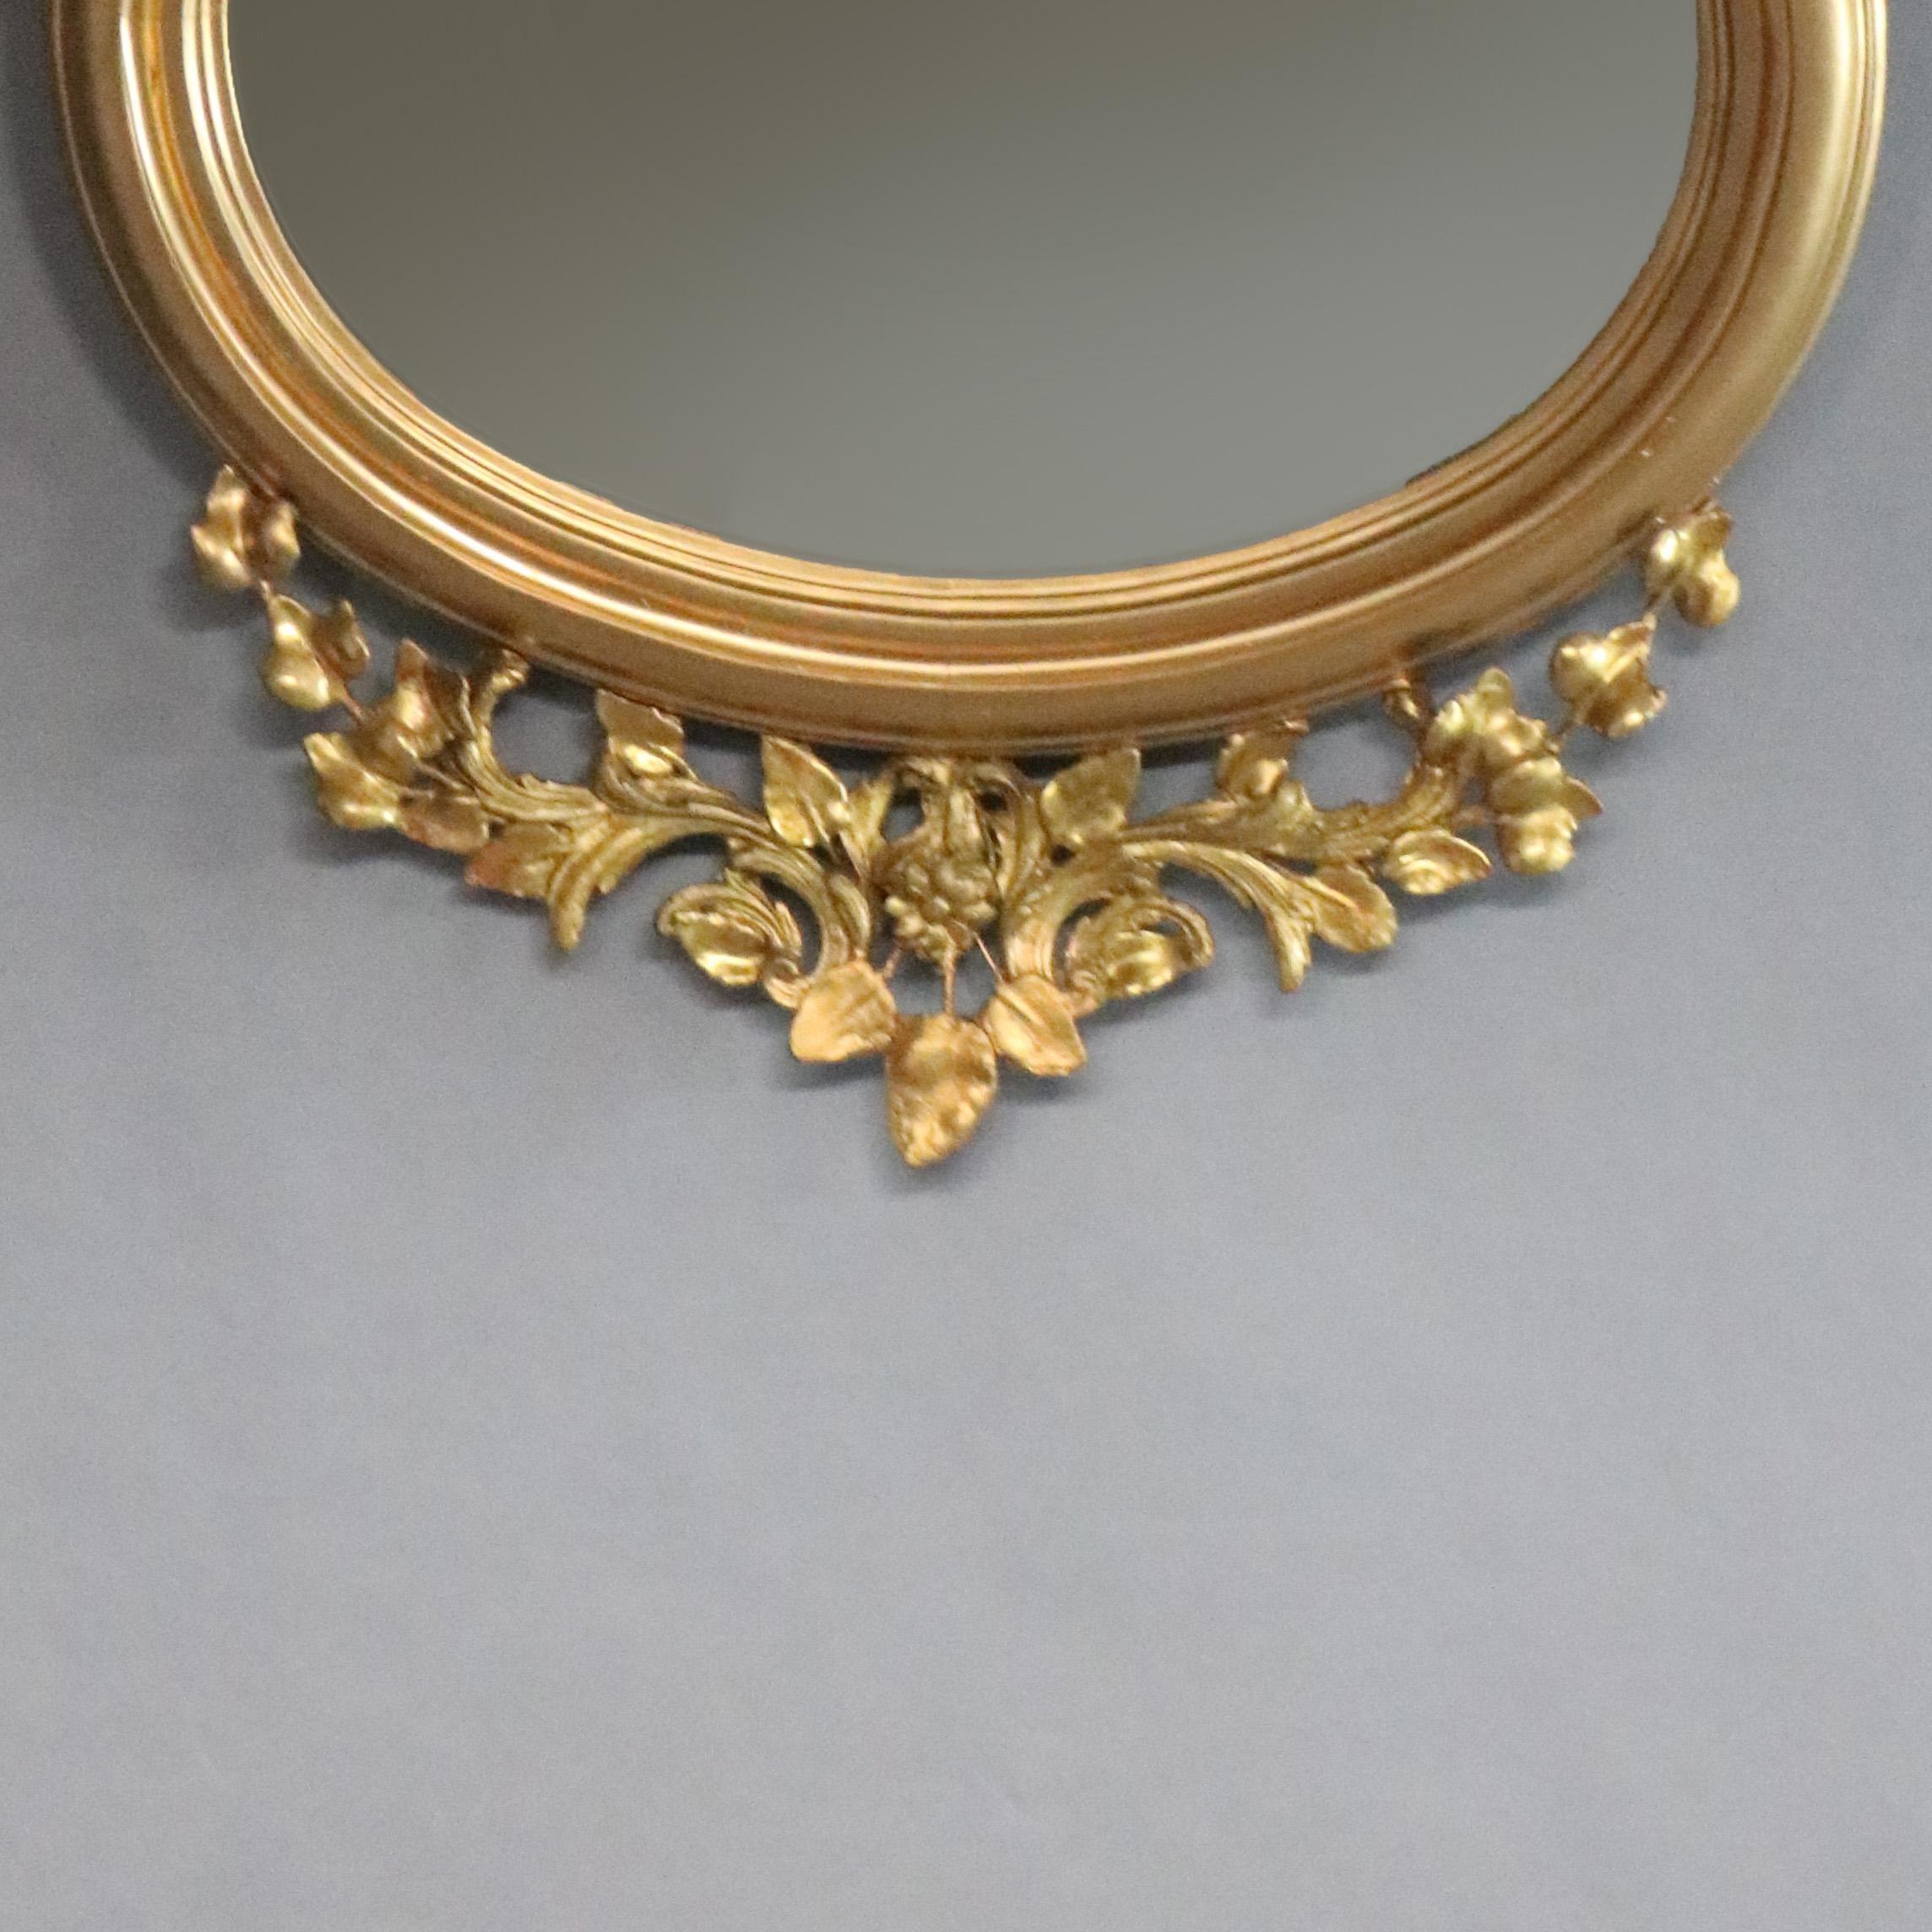 Carved Antique French Louis XVI Style Foliate Giltwood Wall Mirror, circa 1890